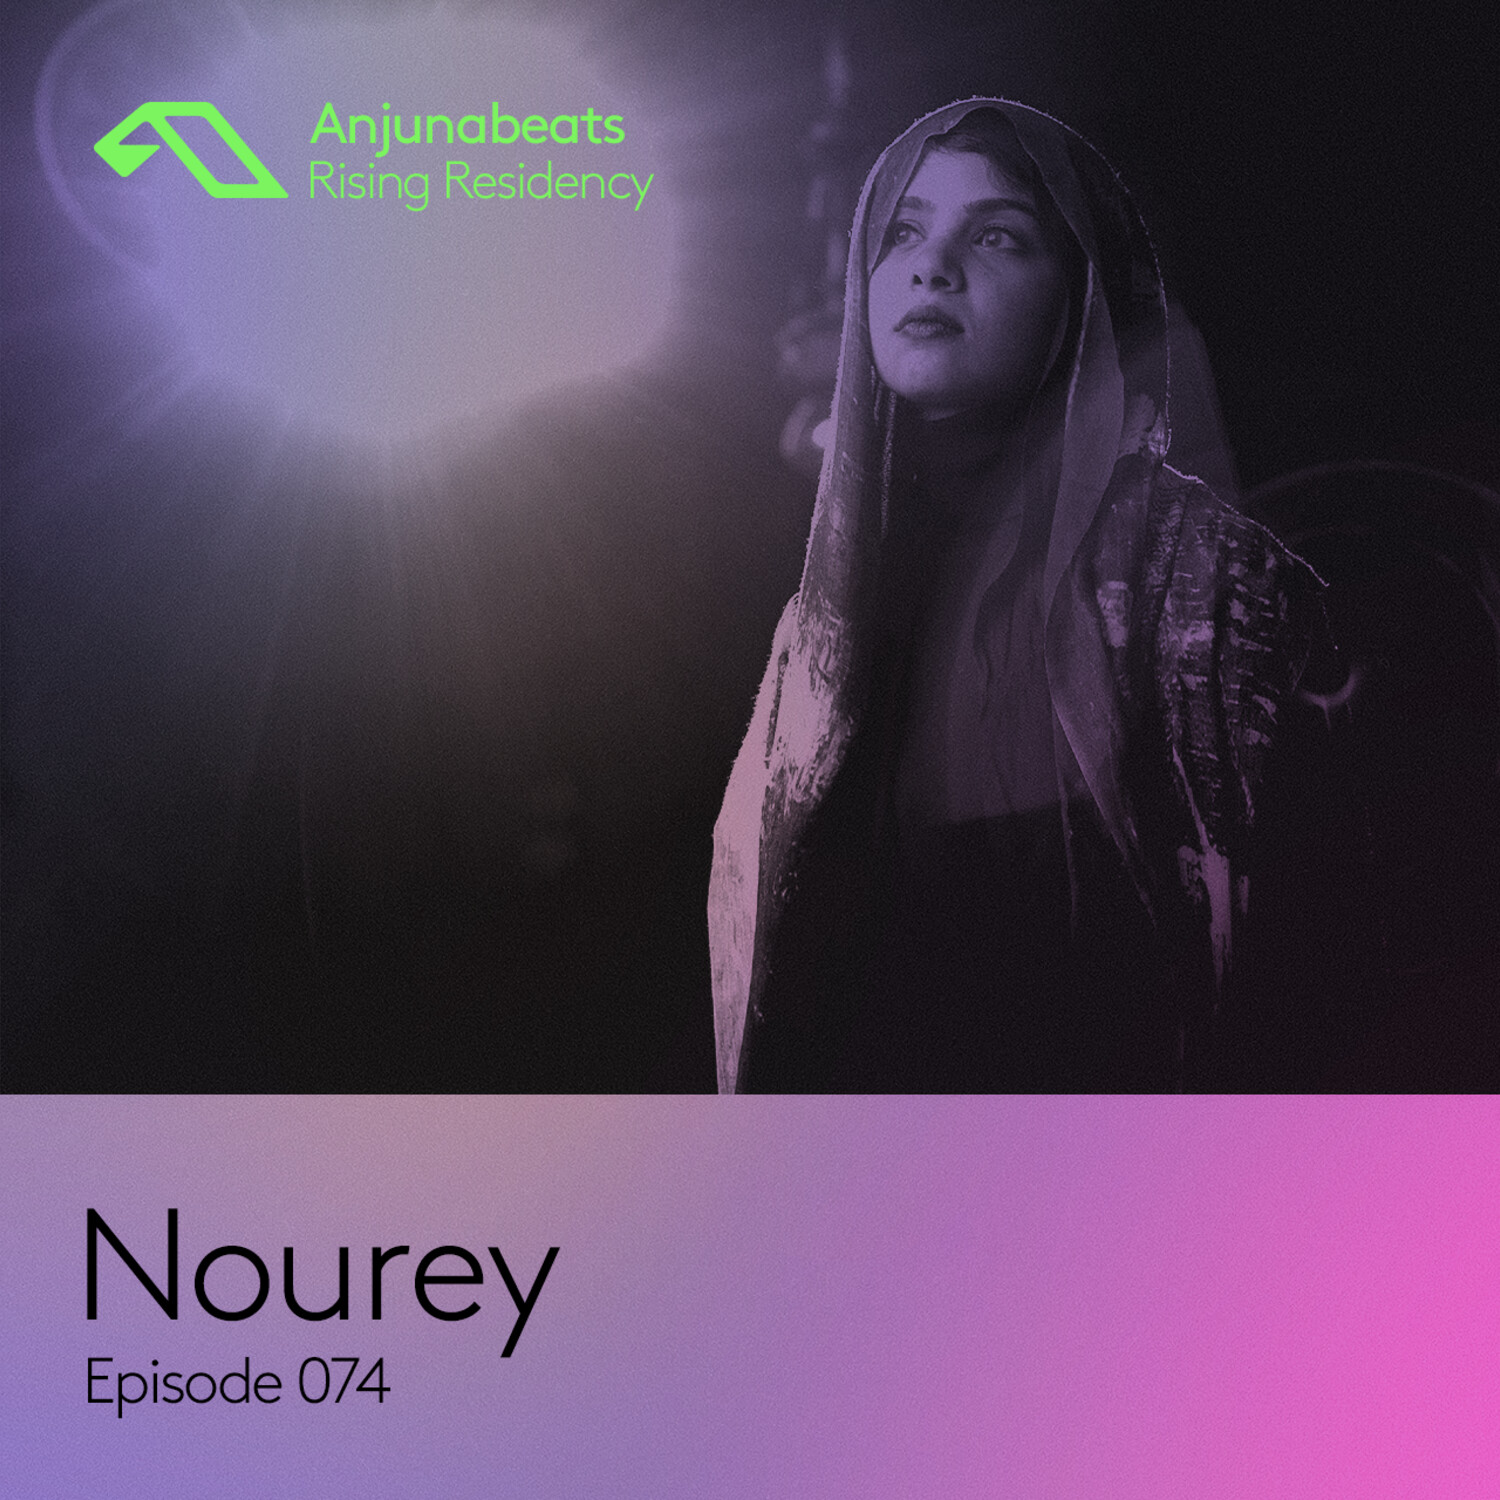 The Anjunabeats Rising Residency 074 with Nourey